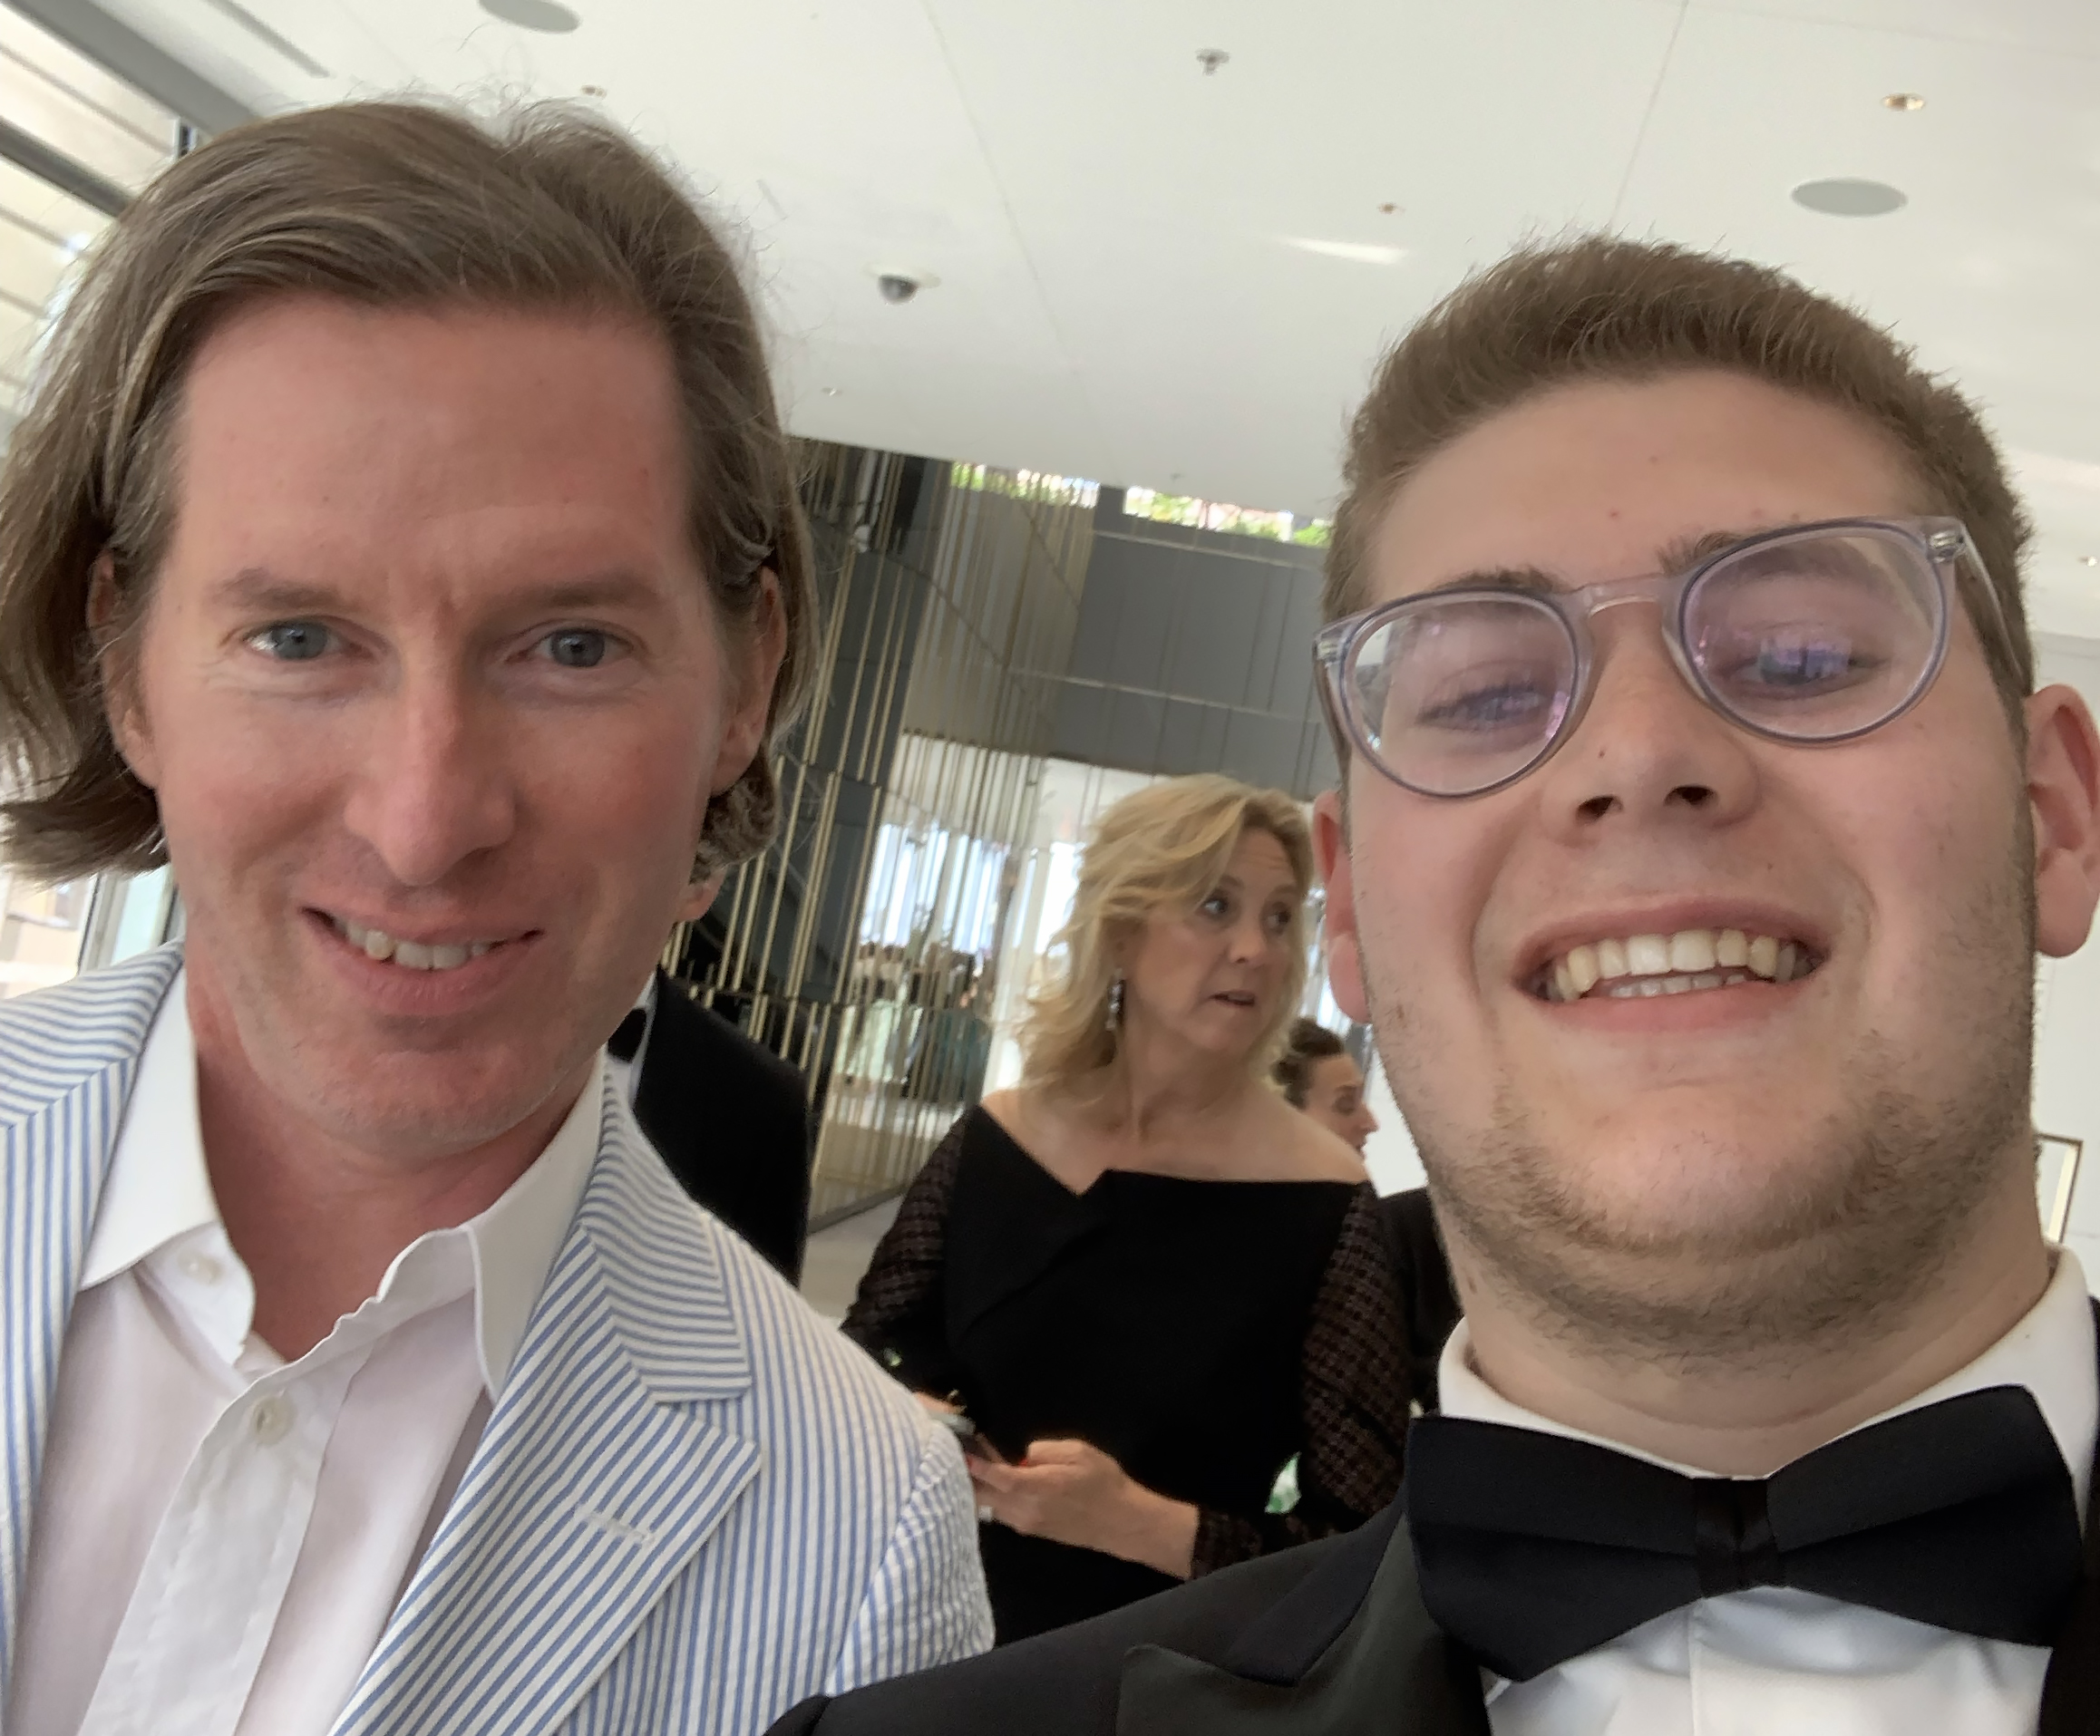 Director Wes Anderson and Penn student Jacob Pollack in a selfie in a hotel lobby